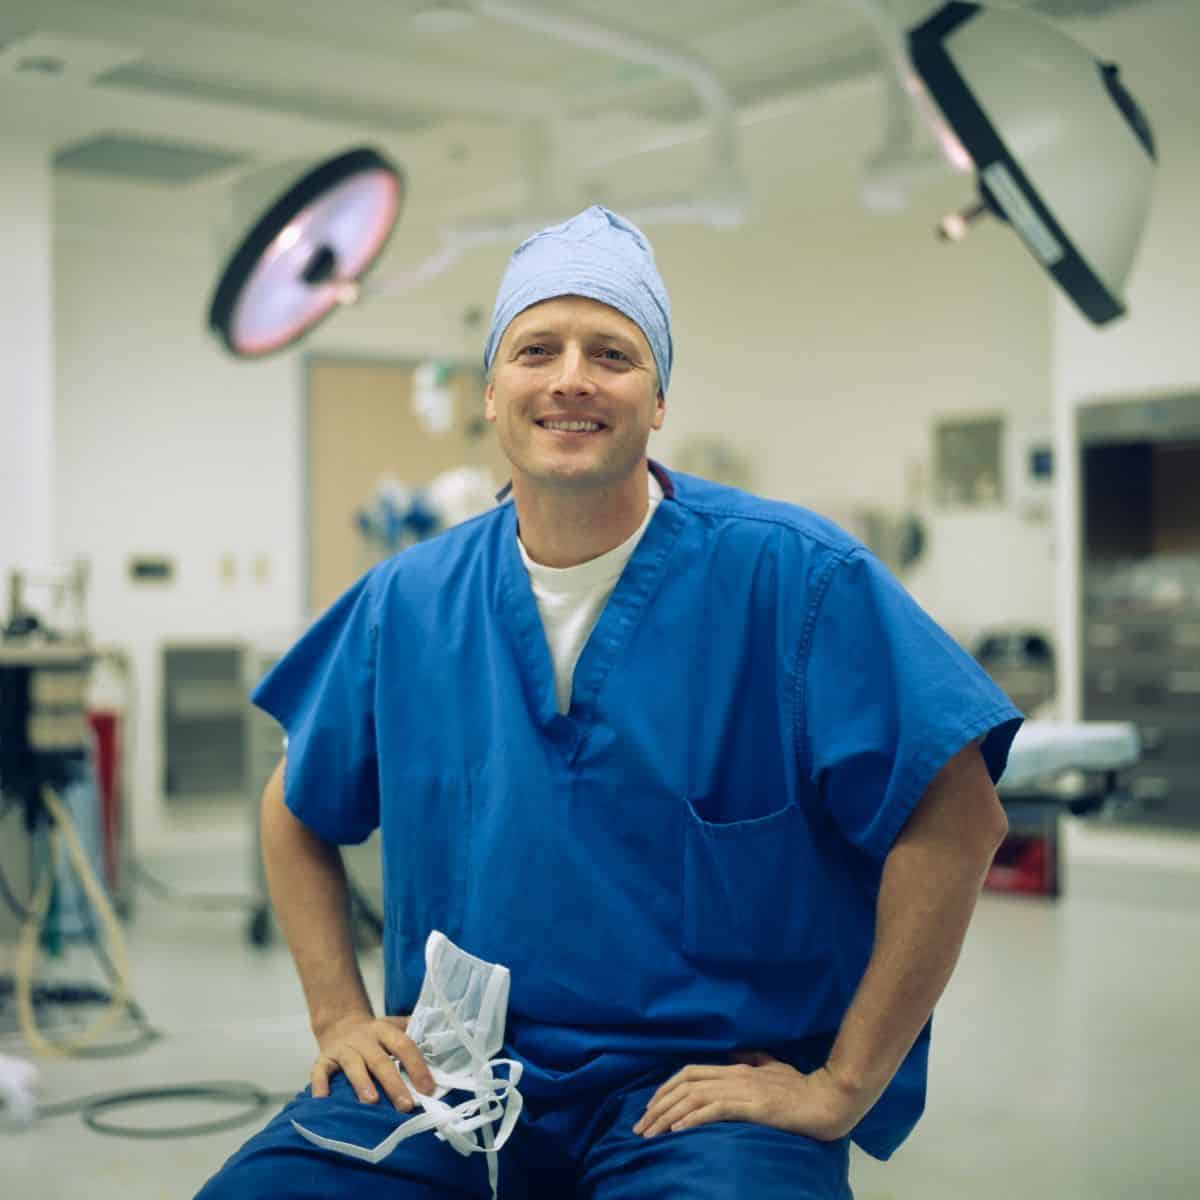 Facts About Surgeons and Surgery